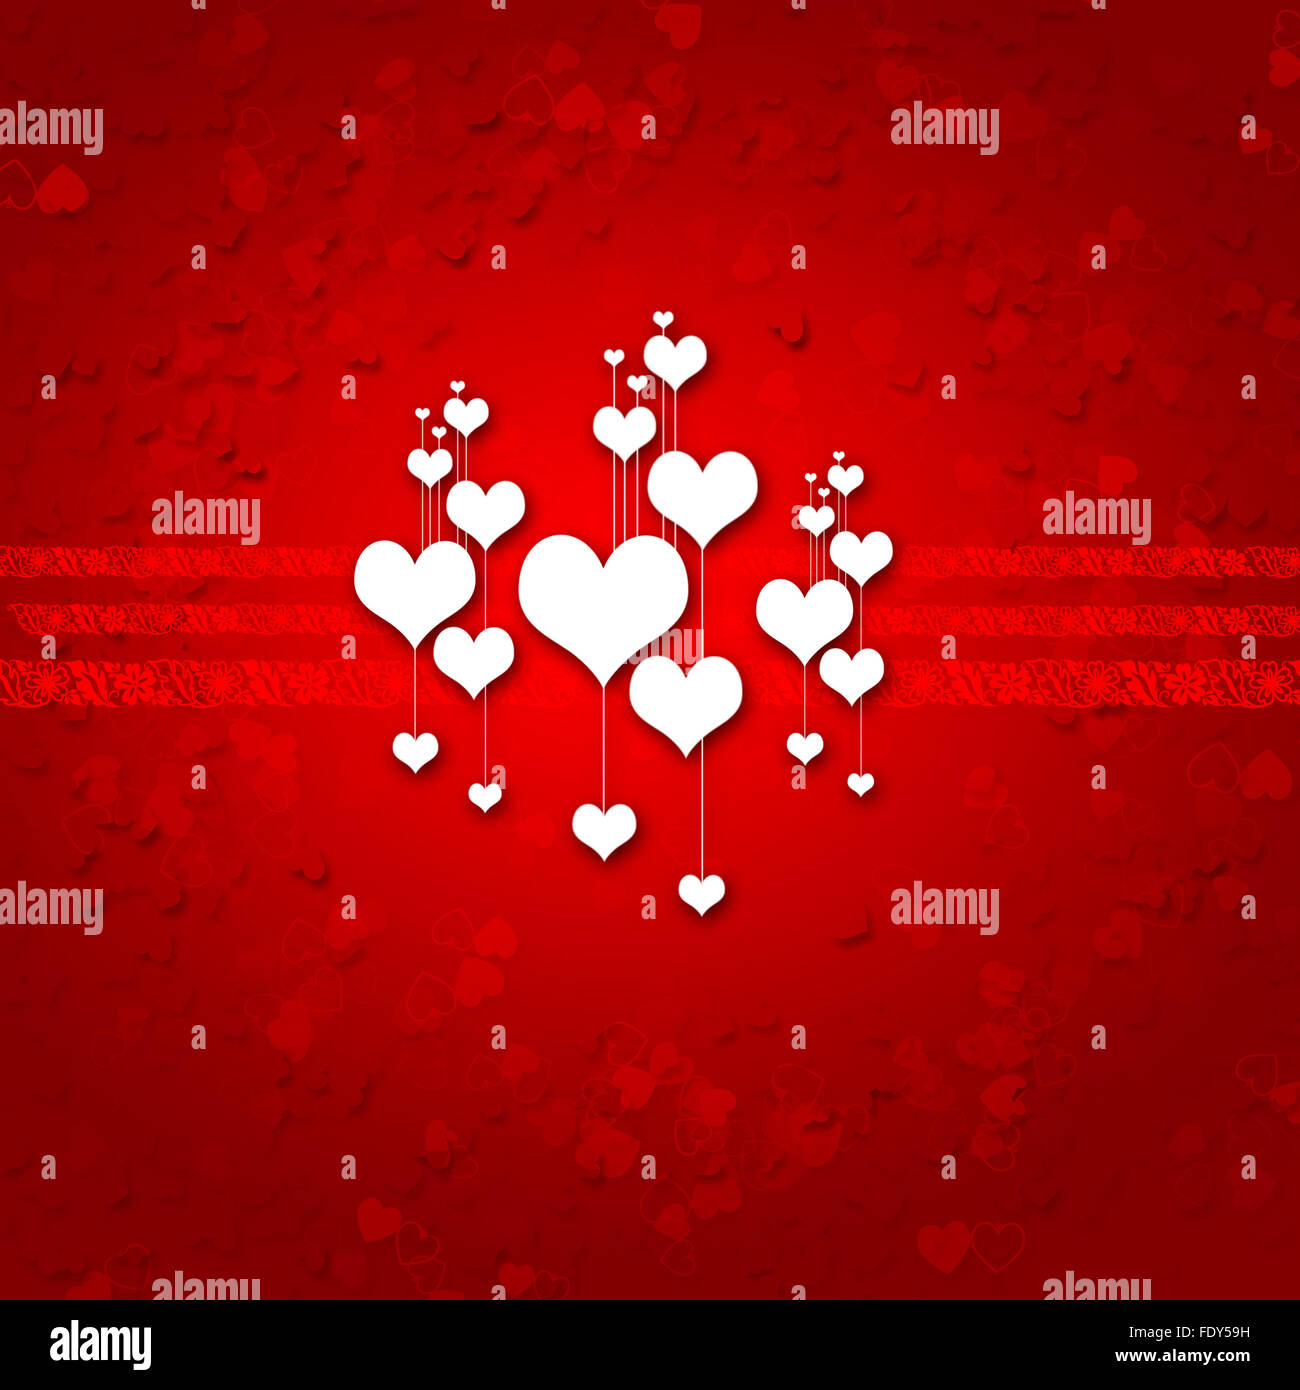 Drawing with hearts dedicated to St. Valentine's Day. Illustration. Stock Photo